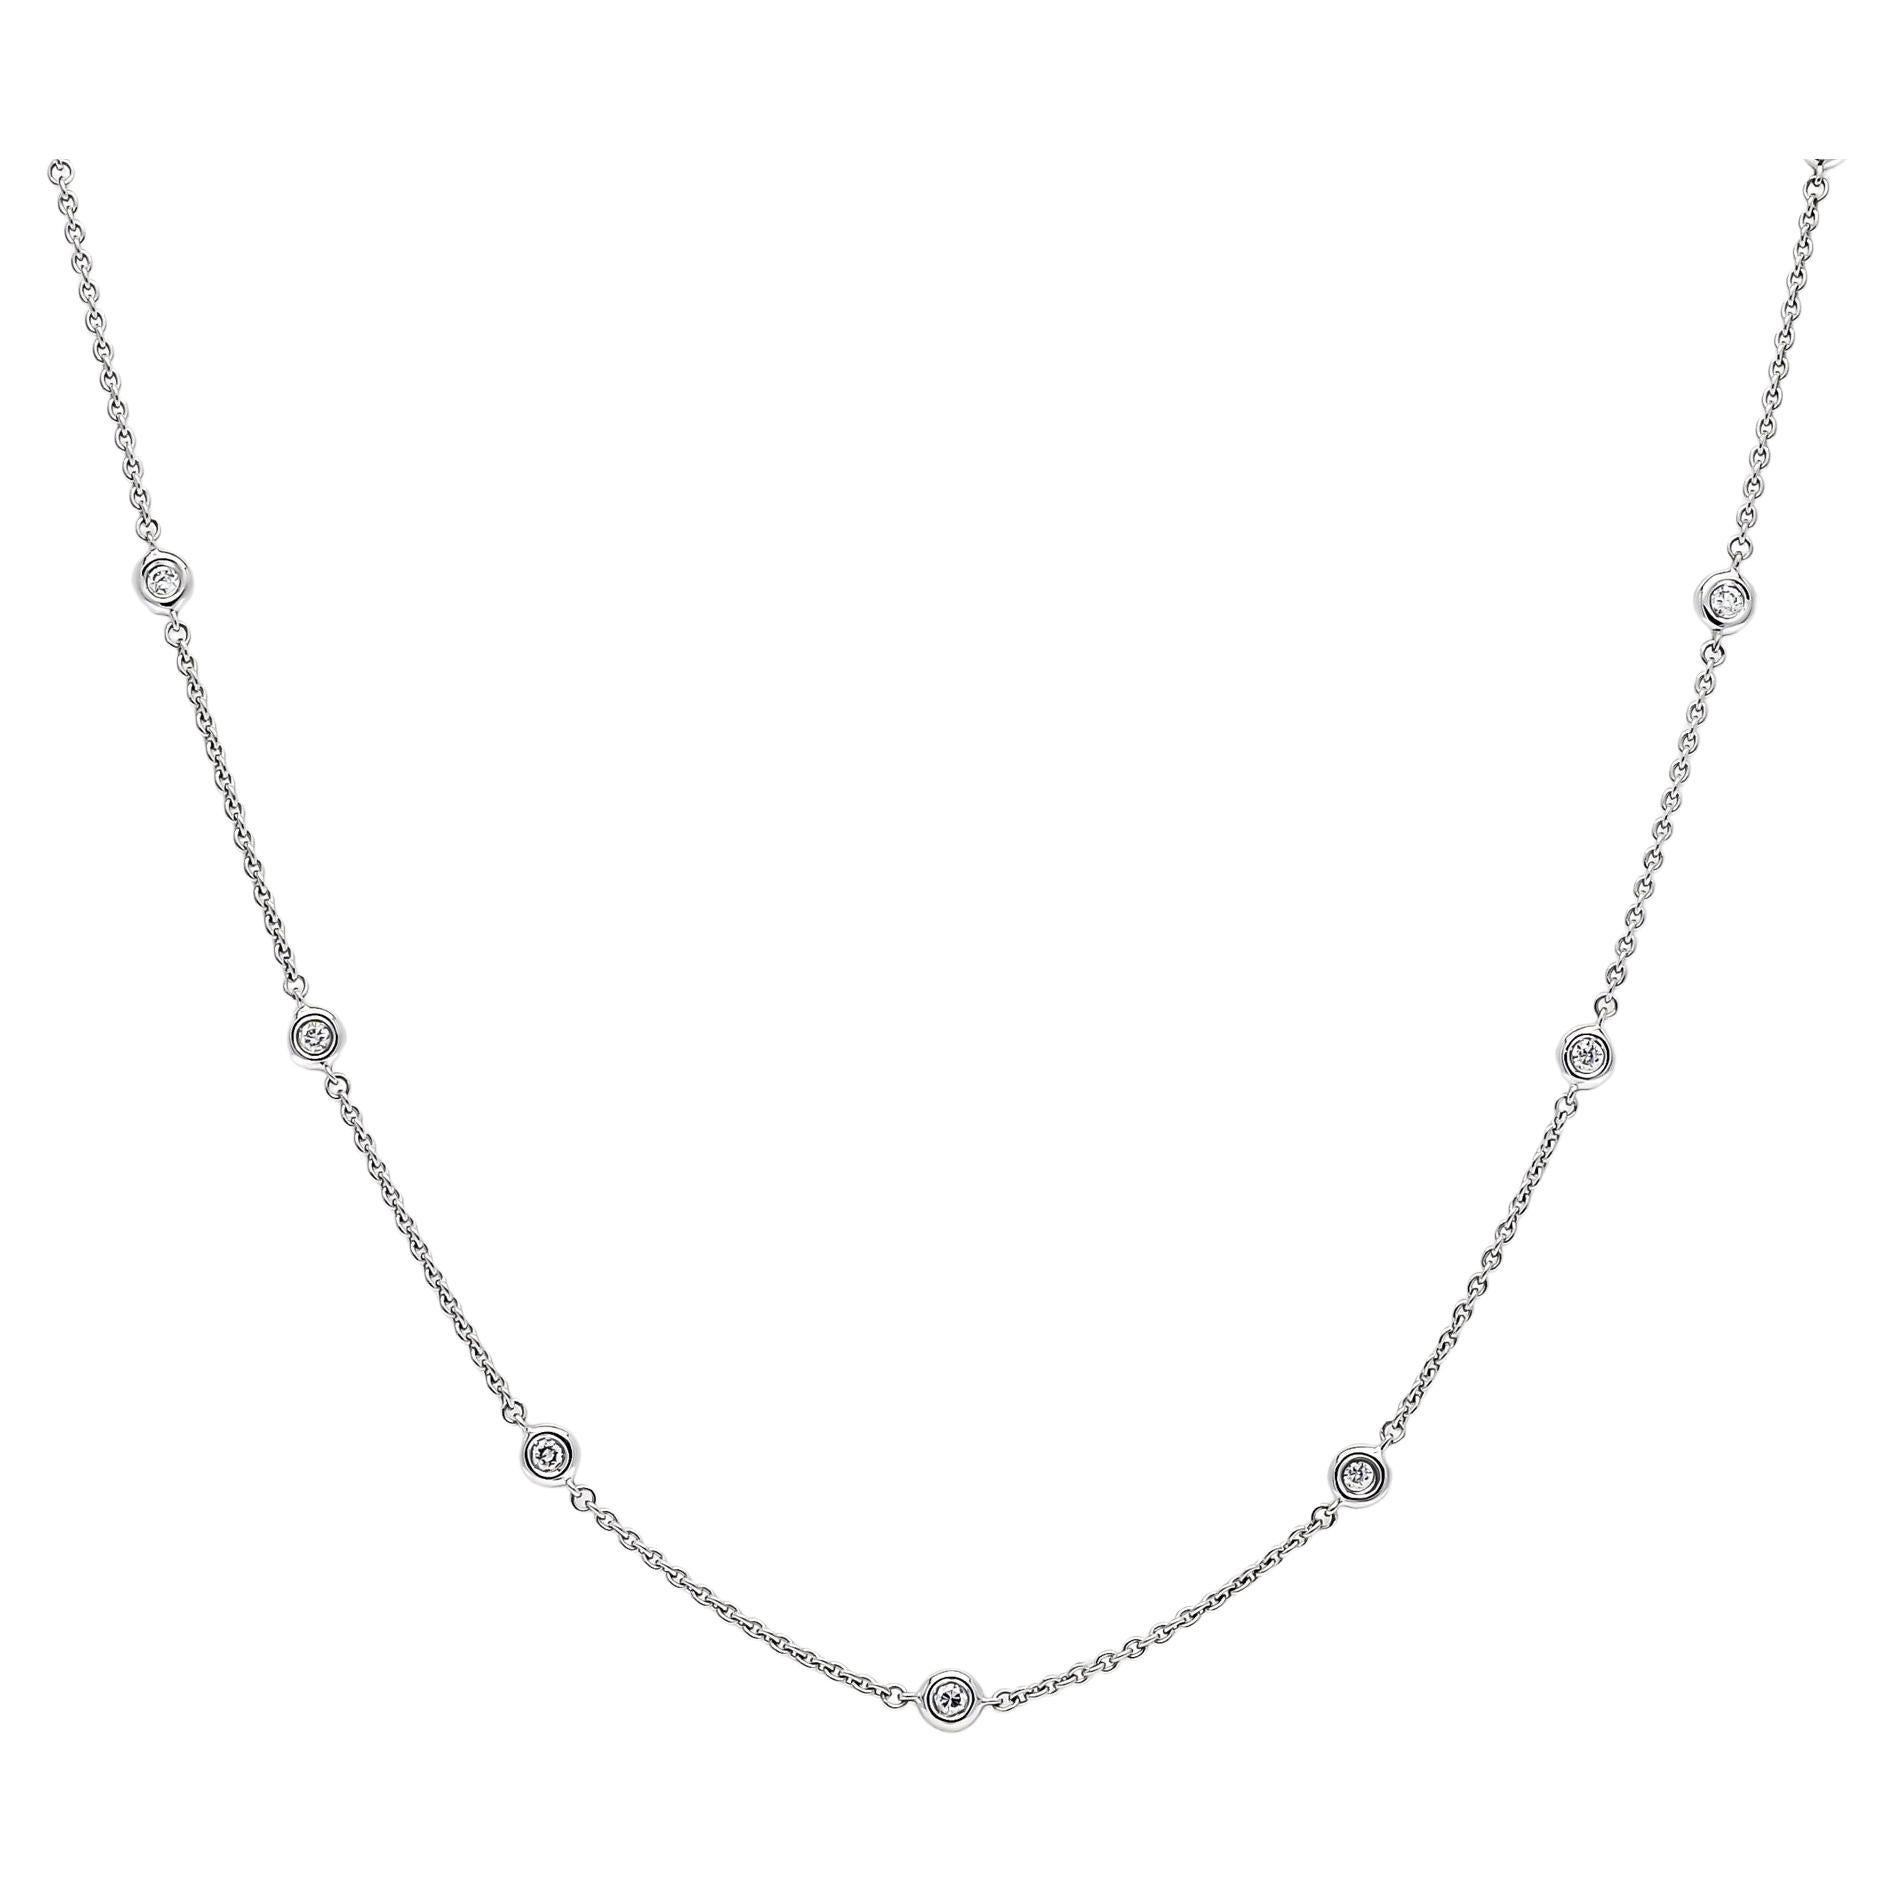  Natural Diamond Chain Necklace 0.35 cts 18 Karat White Gold Chain Necklace